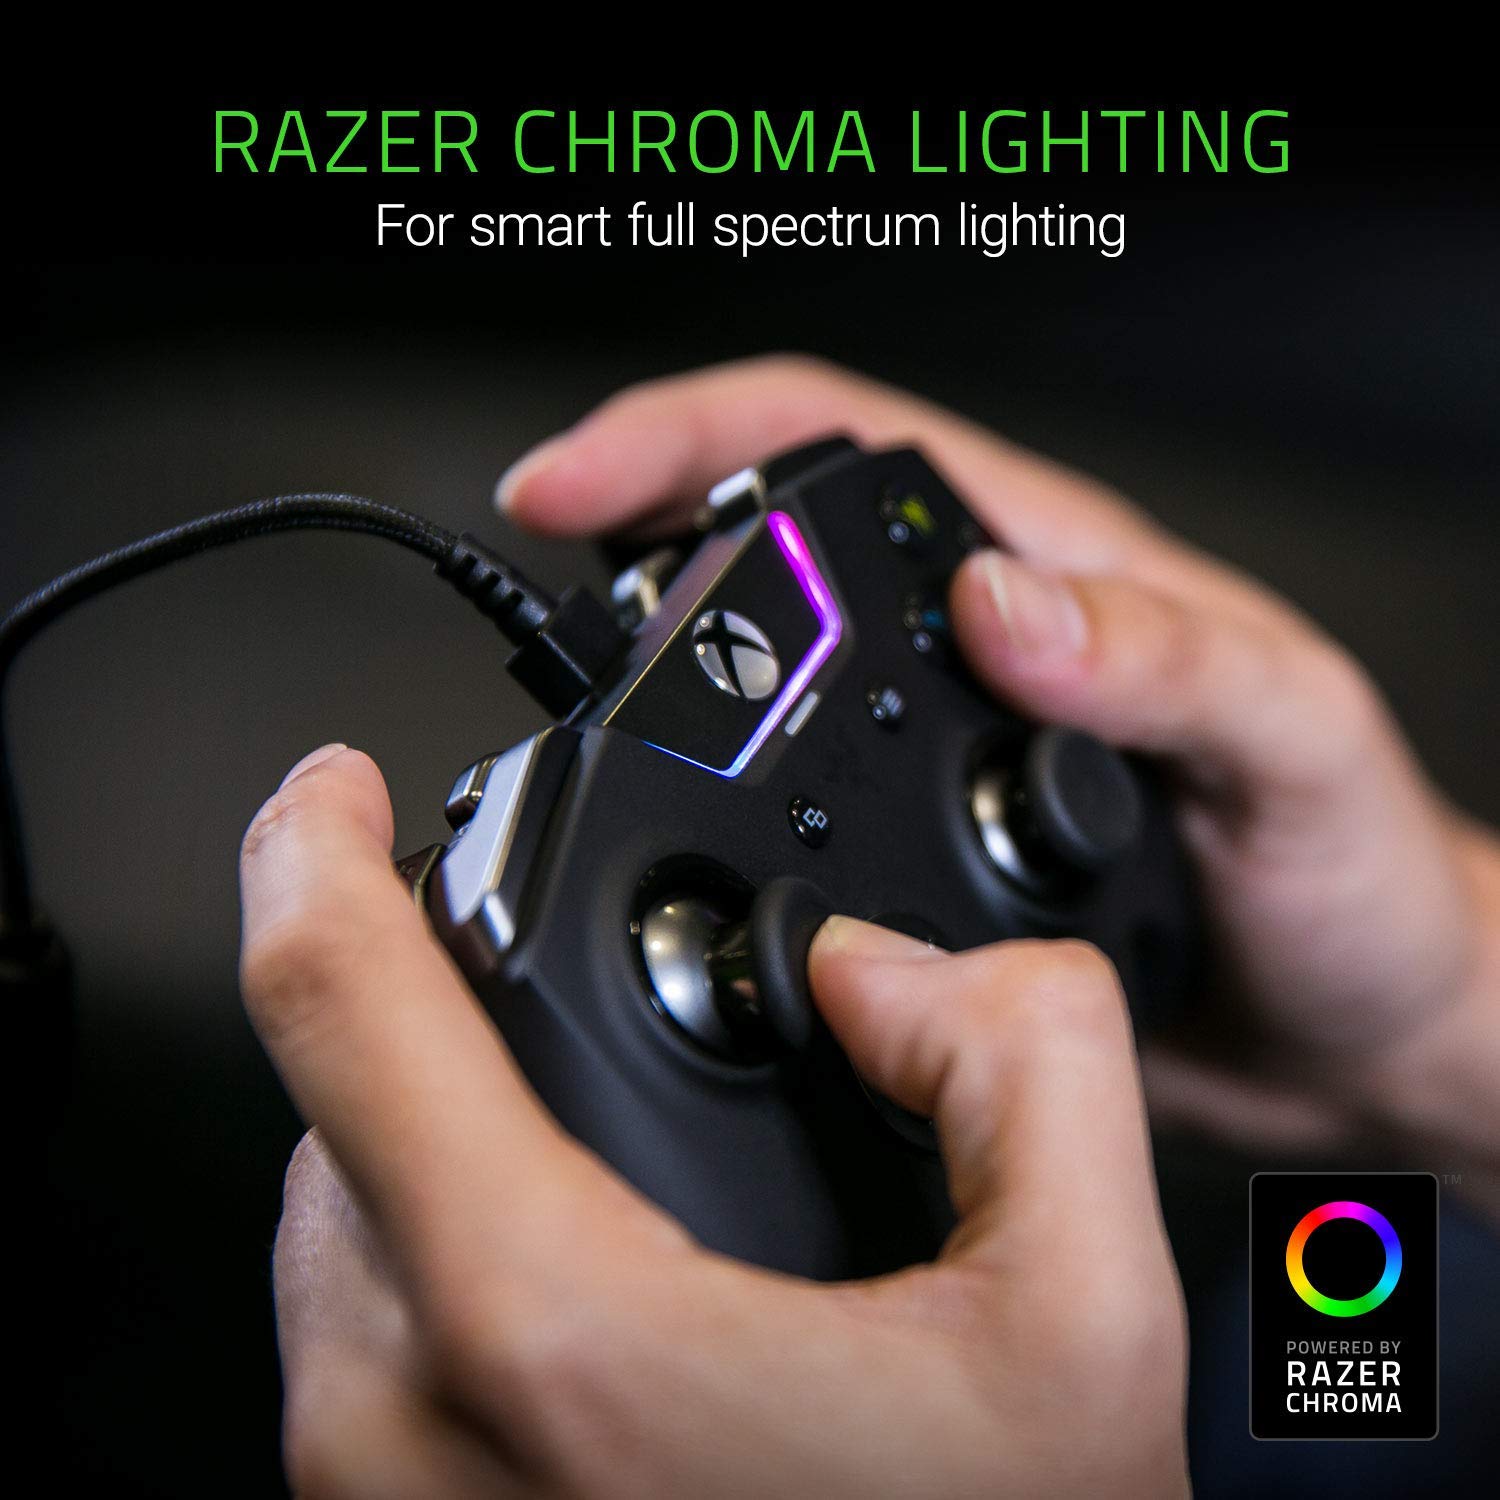 razer wolverine tournament edition gaming controller for xbox one